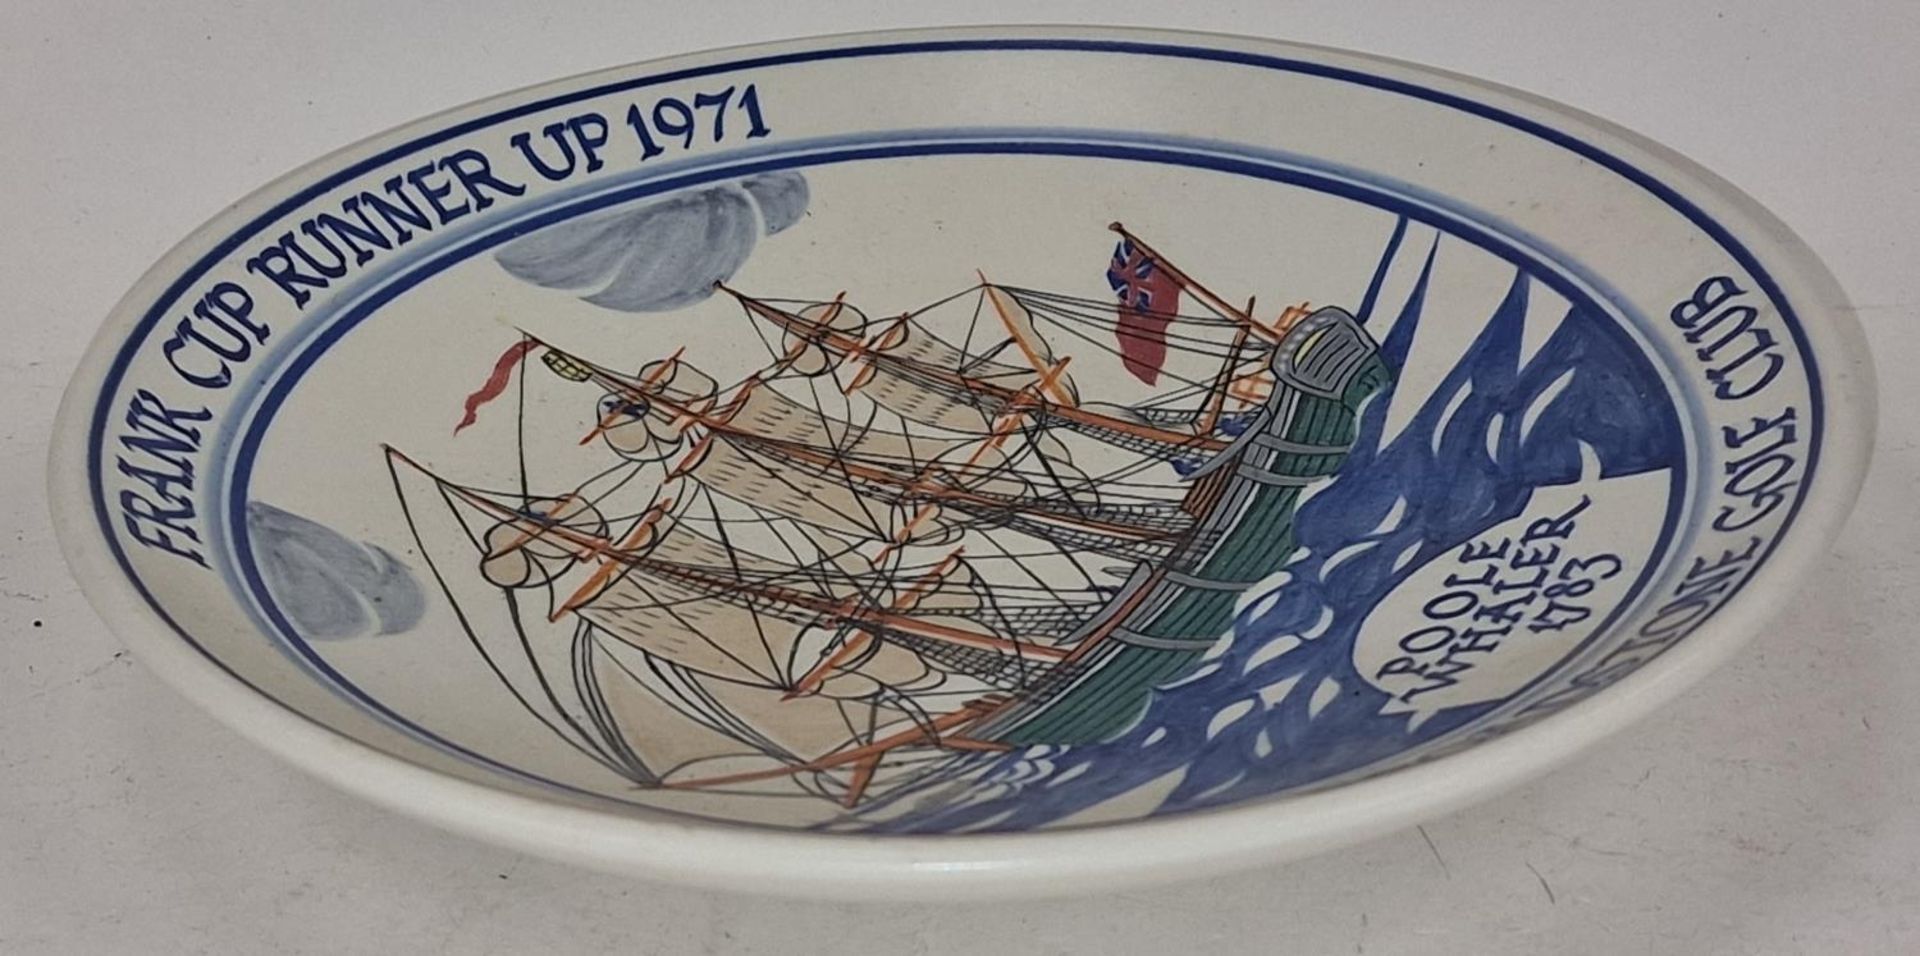 Poole Pottery Poole Whaler 1783 Frank Cup Runner up 1971 plate 8" diameter. - Image 2 of 3